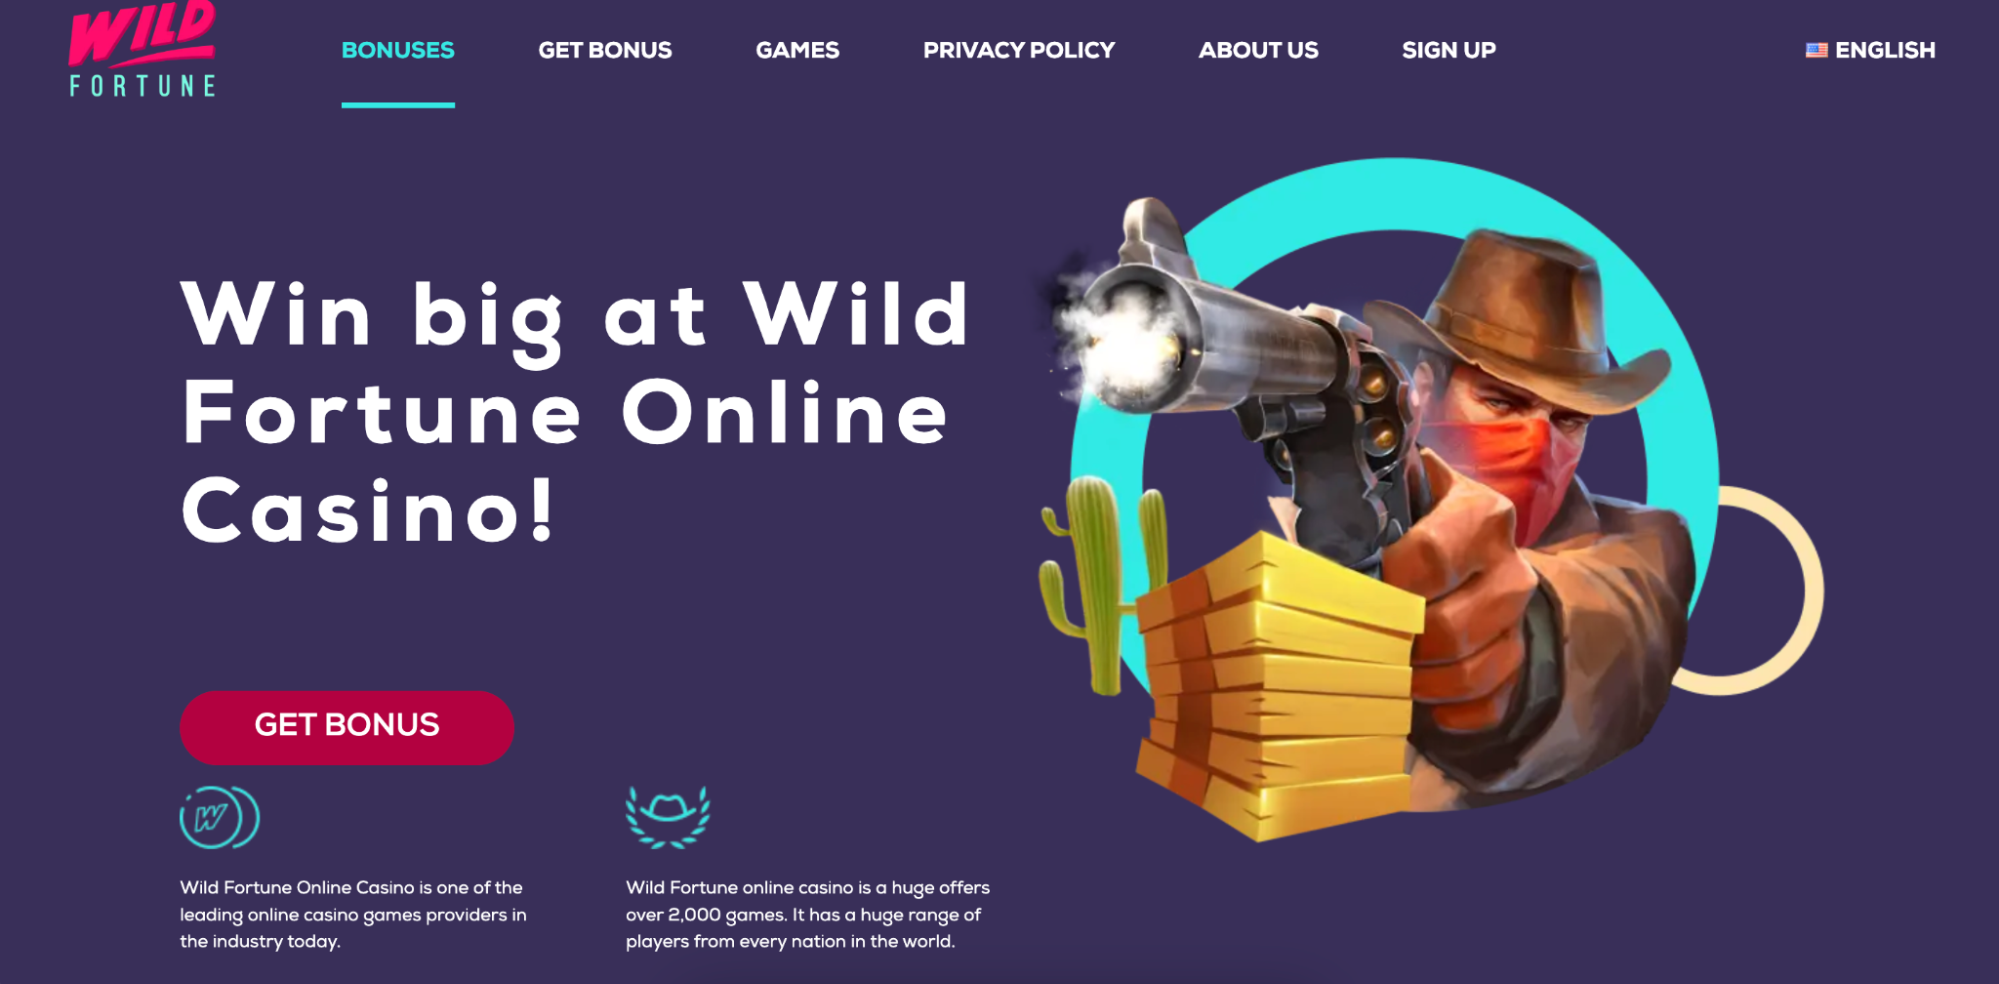 Wild Fortune Casino Review: 100% up to €100 + 100 Free Spins Welcome Bonus valid